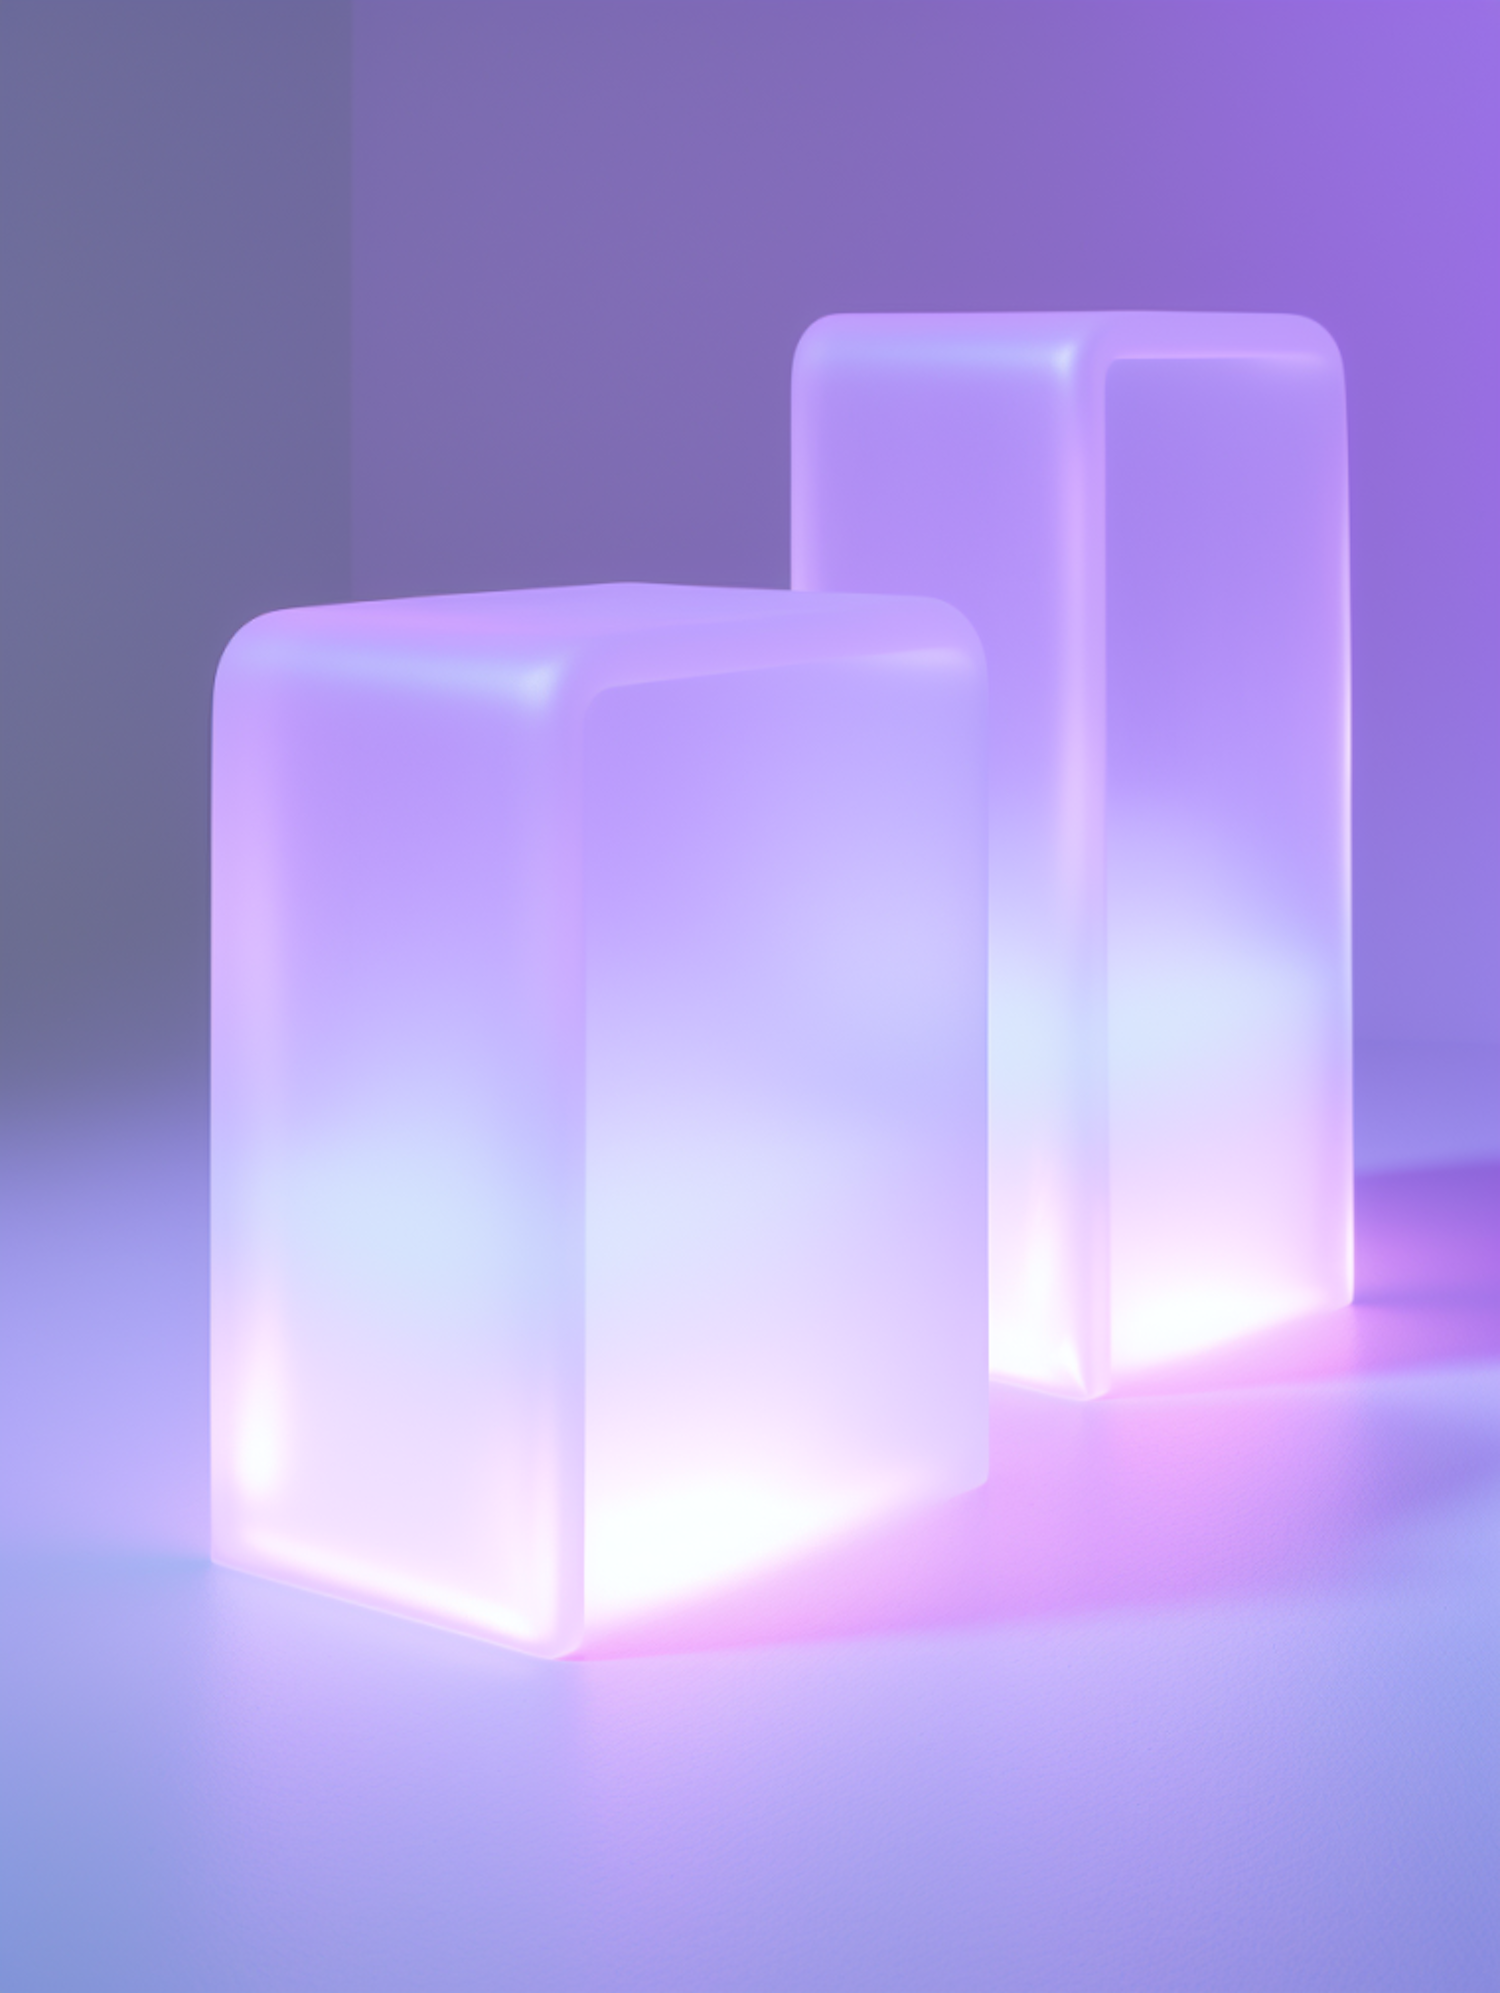 Ethereal Glow Translucent Rectangles